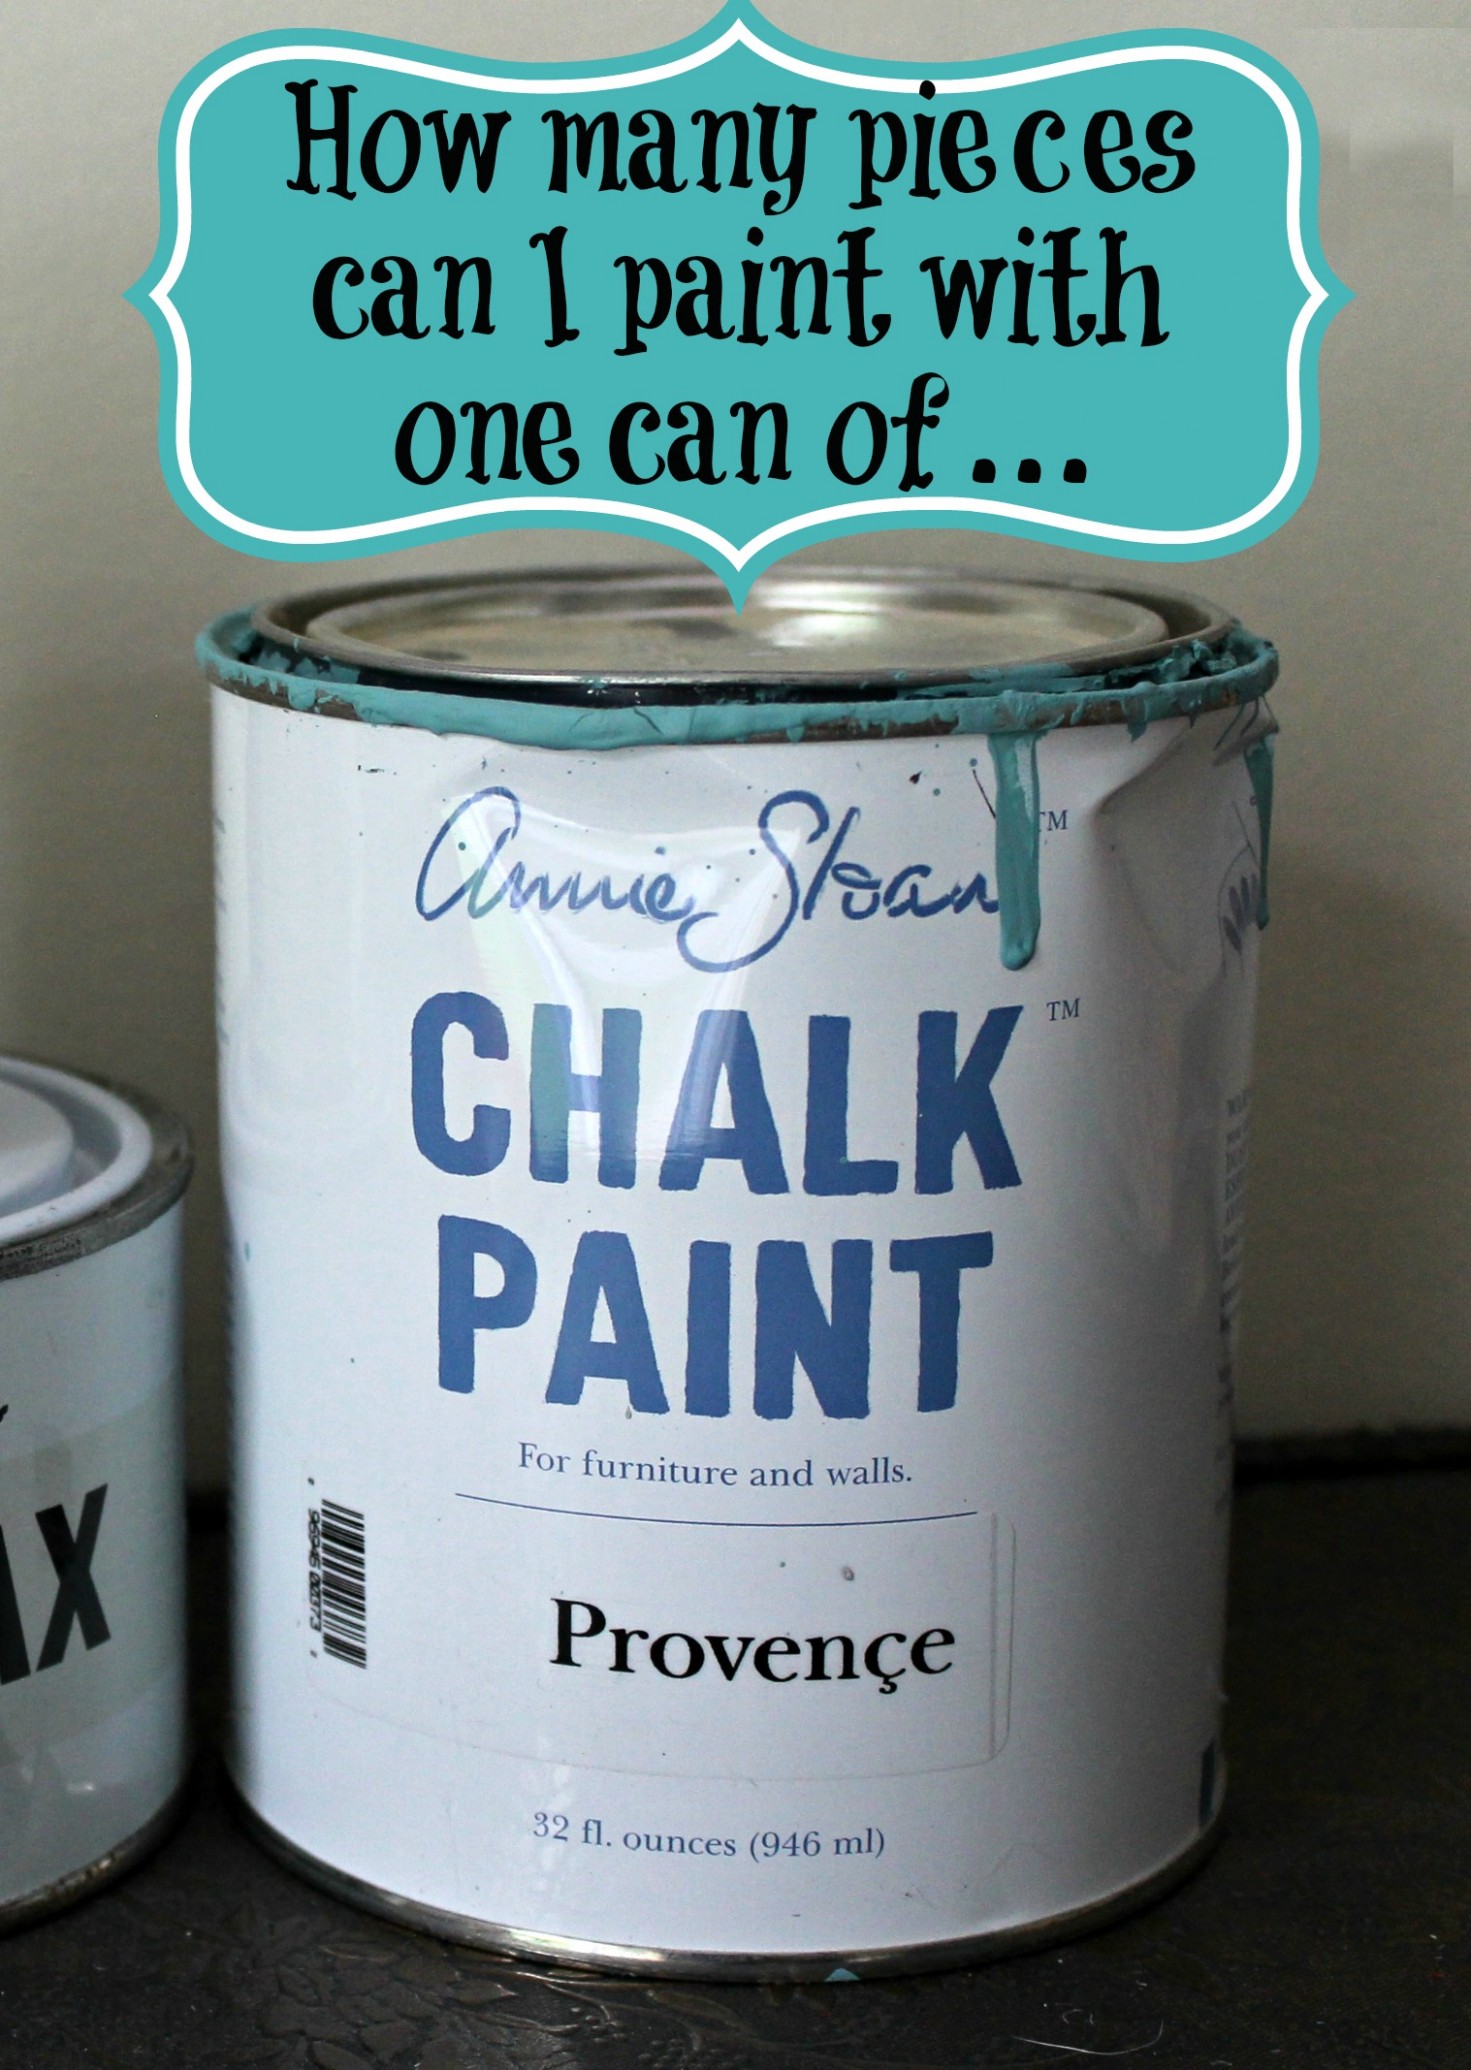 Top 10 Popular Diy Posts Of 2014 Where Can I Buy Annie Sloan Chalk Paint In Edmonton